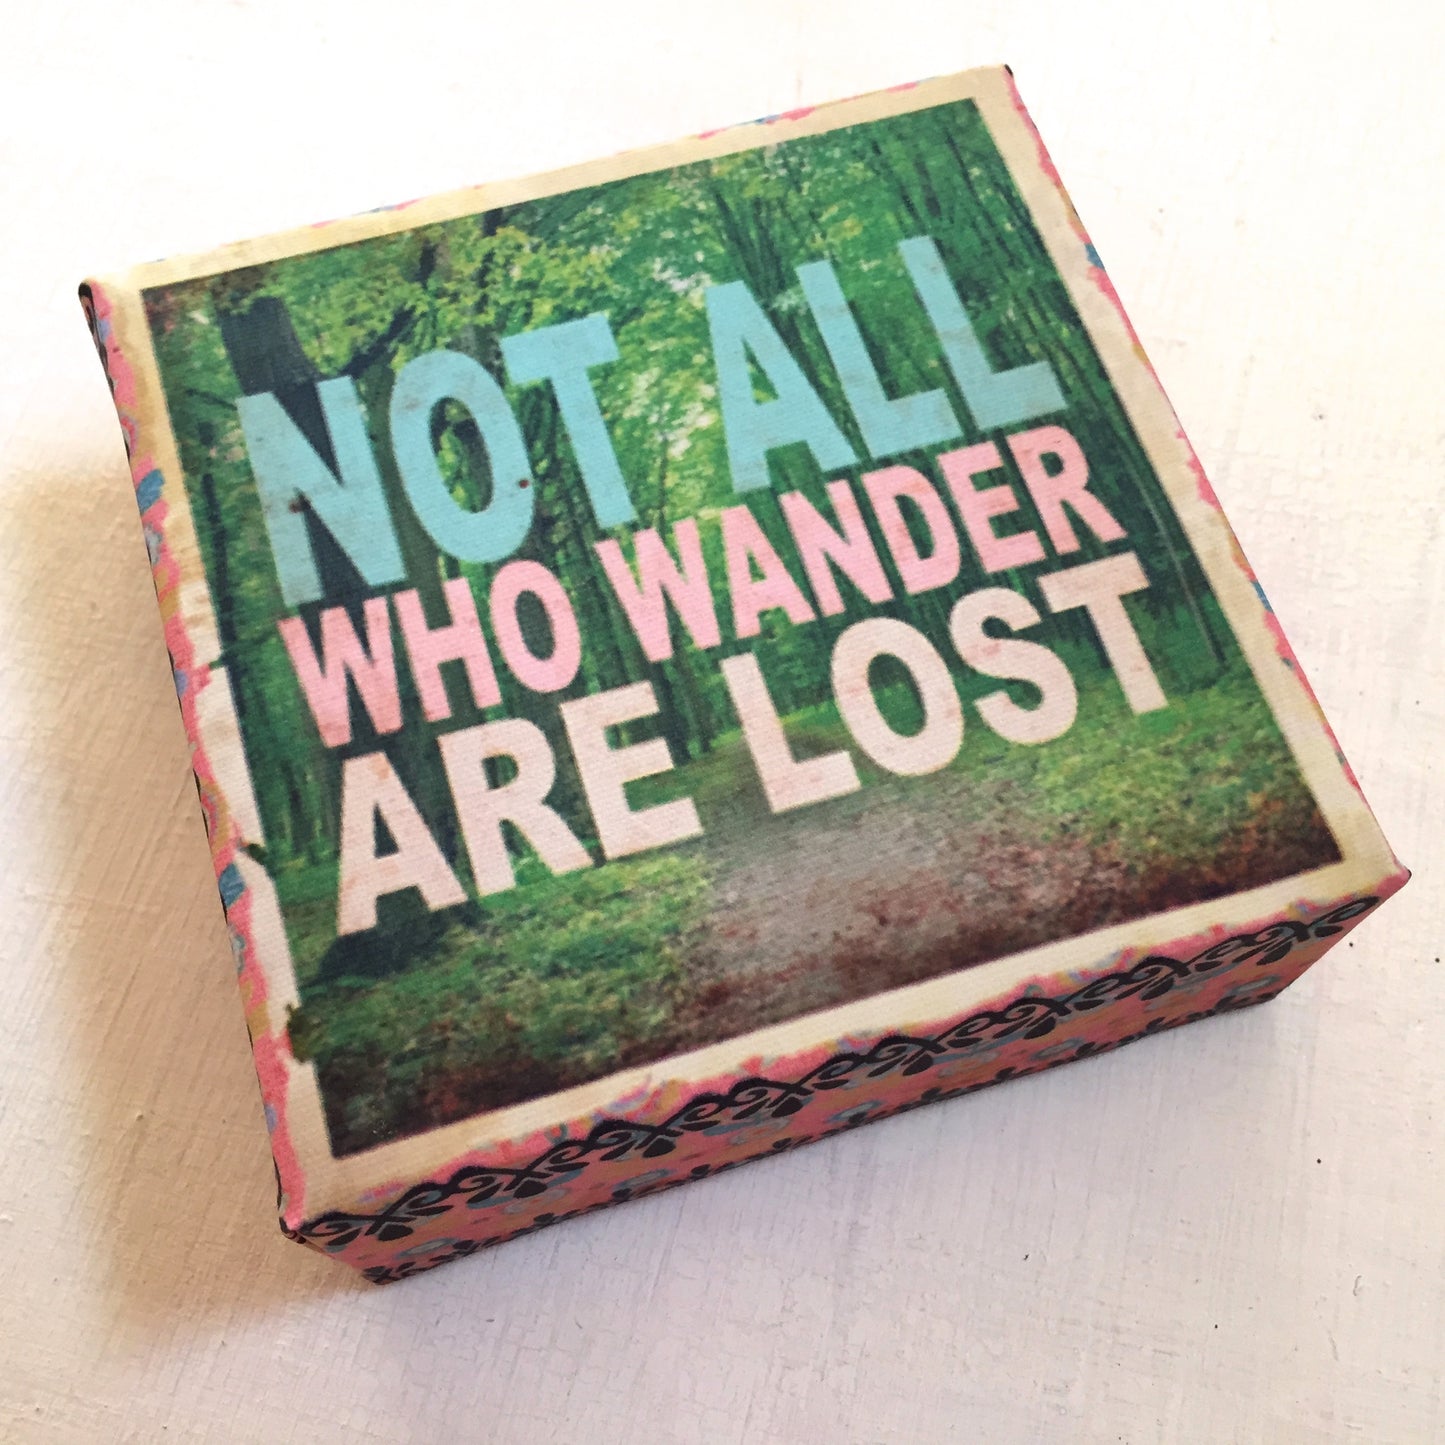 Not All Who Wander Are Lost~ Inspirational Art Block Canvas